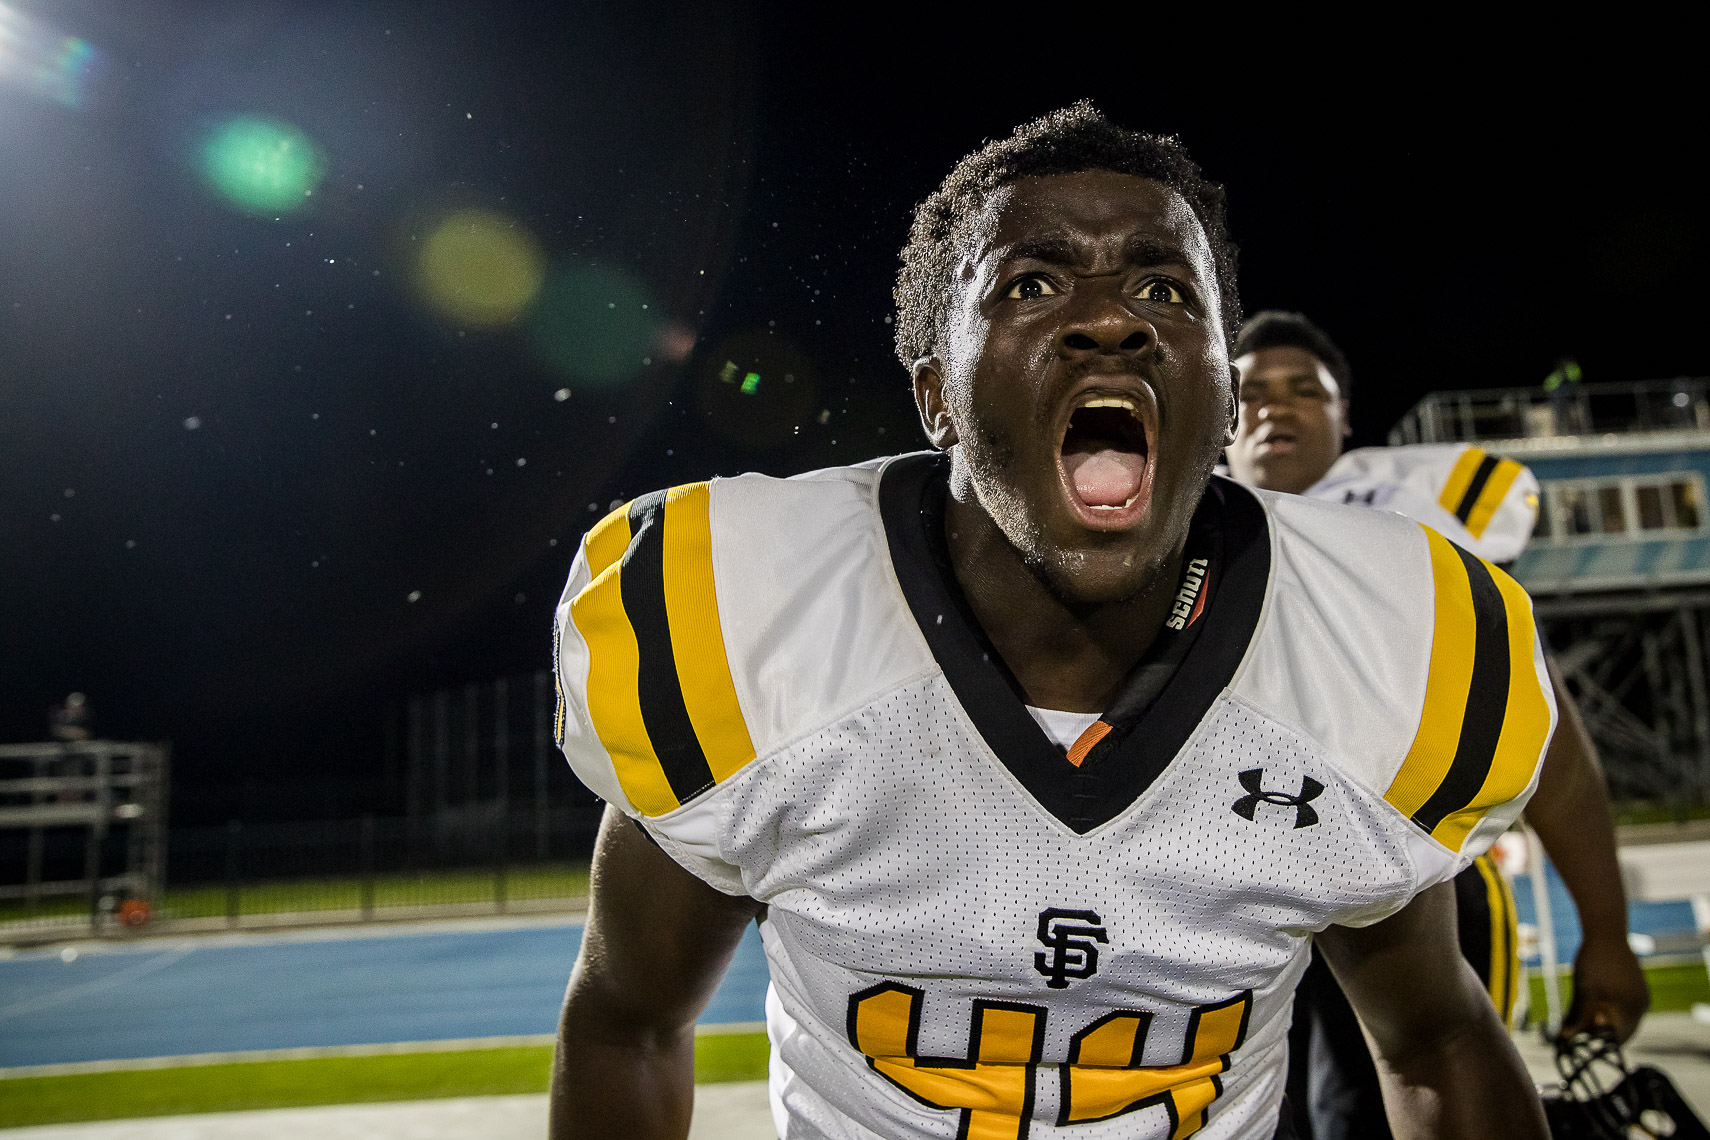 stfrances33_ St Frances Academy Panthers football Baltimore City poverty ESPN documentary MIAA Champions youth football team versus IMG Academy football Bradenton Florida Under Armour emotional sports photography